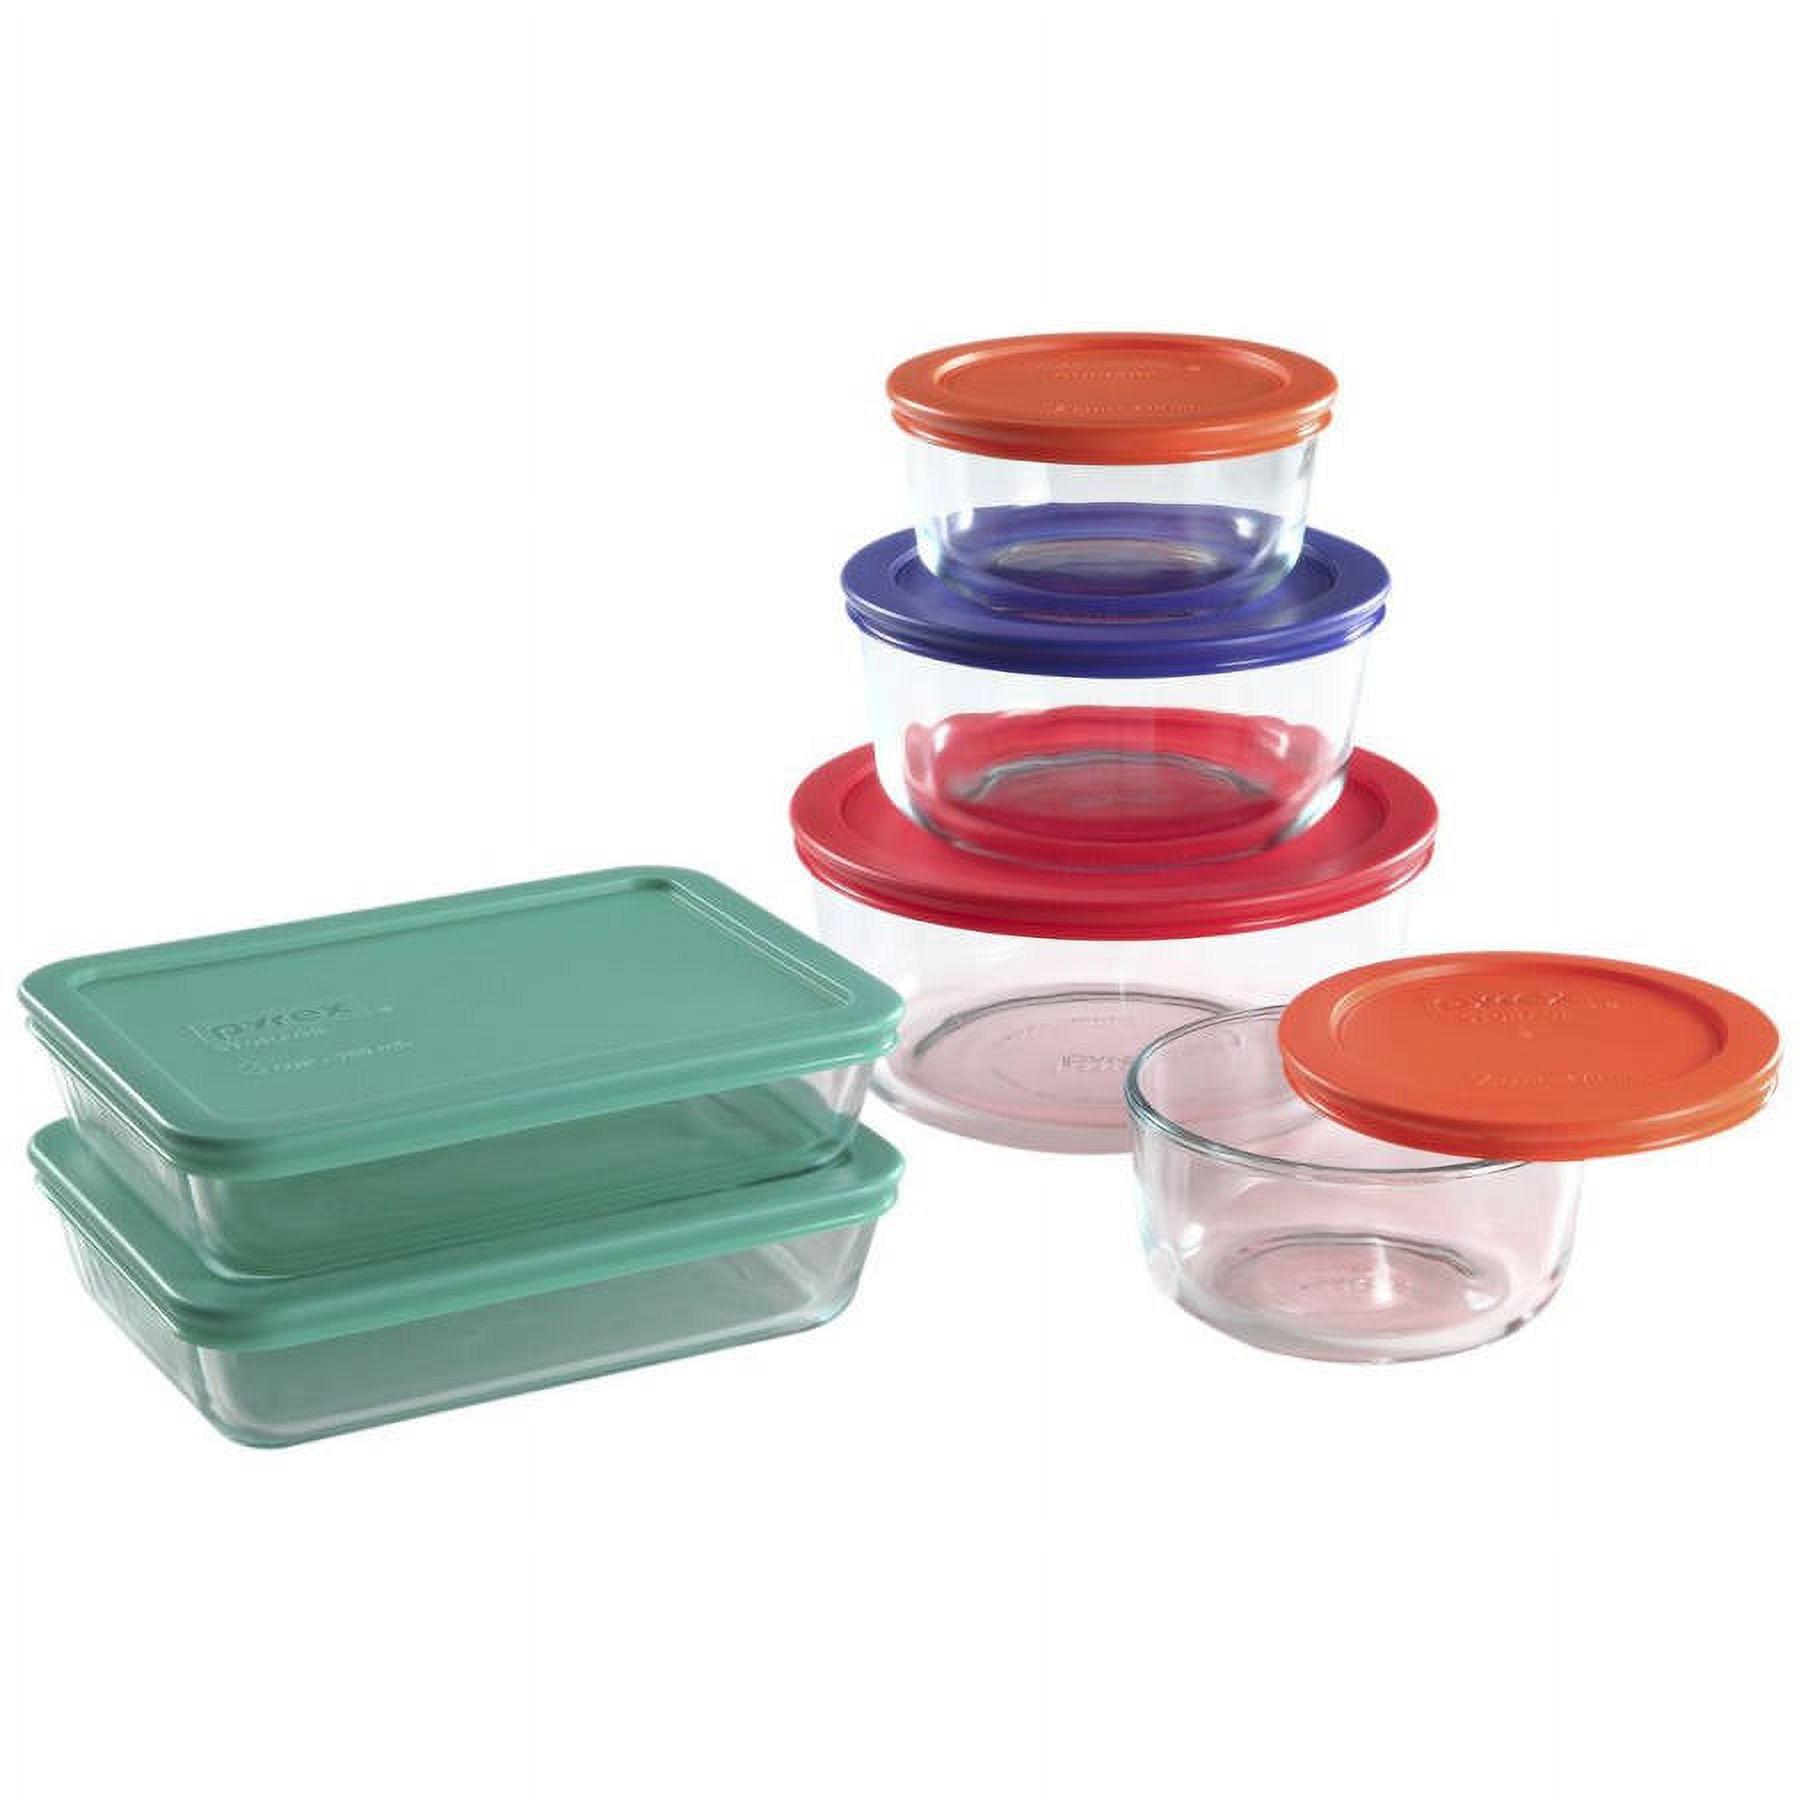 Pyrex Food Storage Glass Bakeware Set with Color Lids, 12 Piece - image 1 of 2